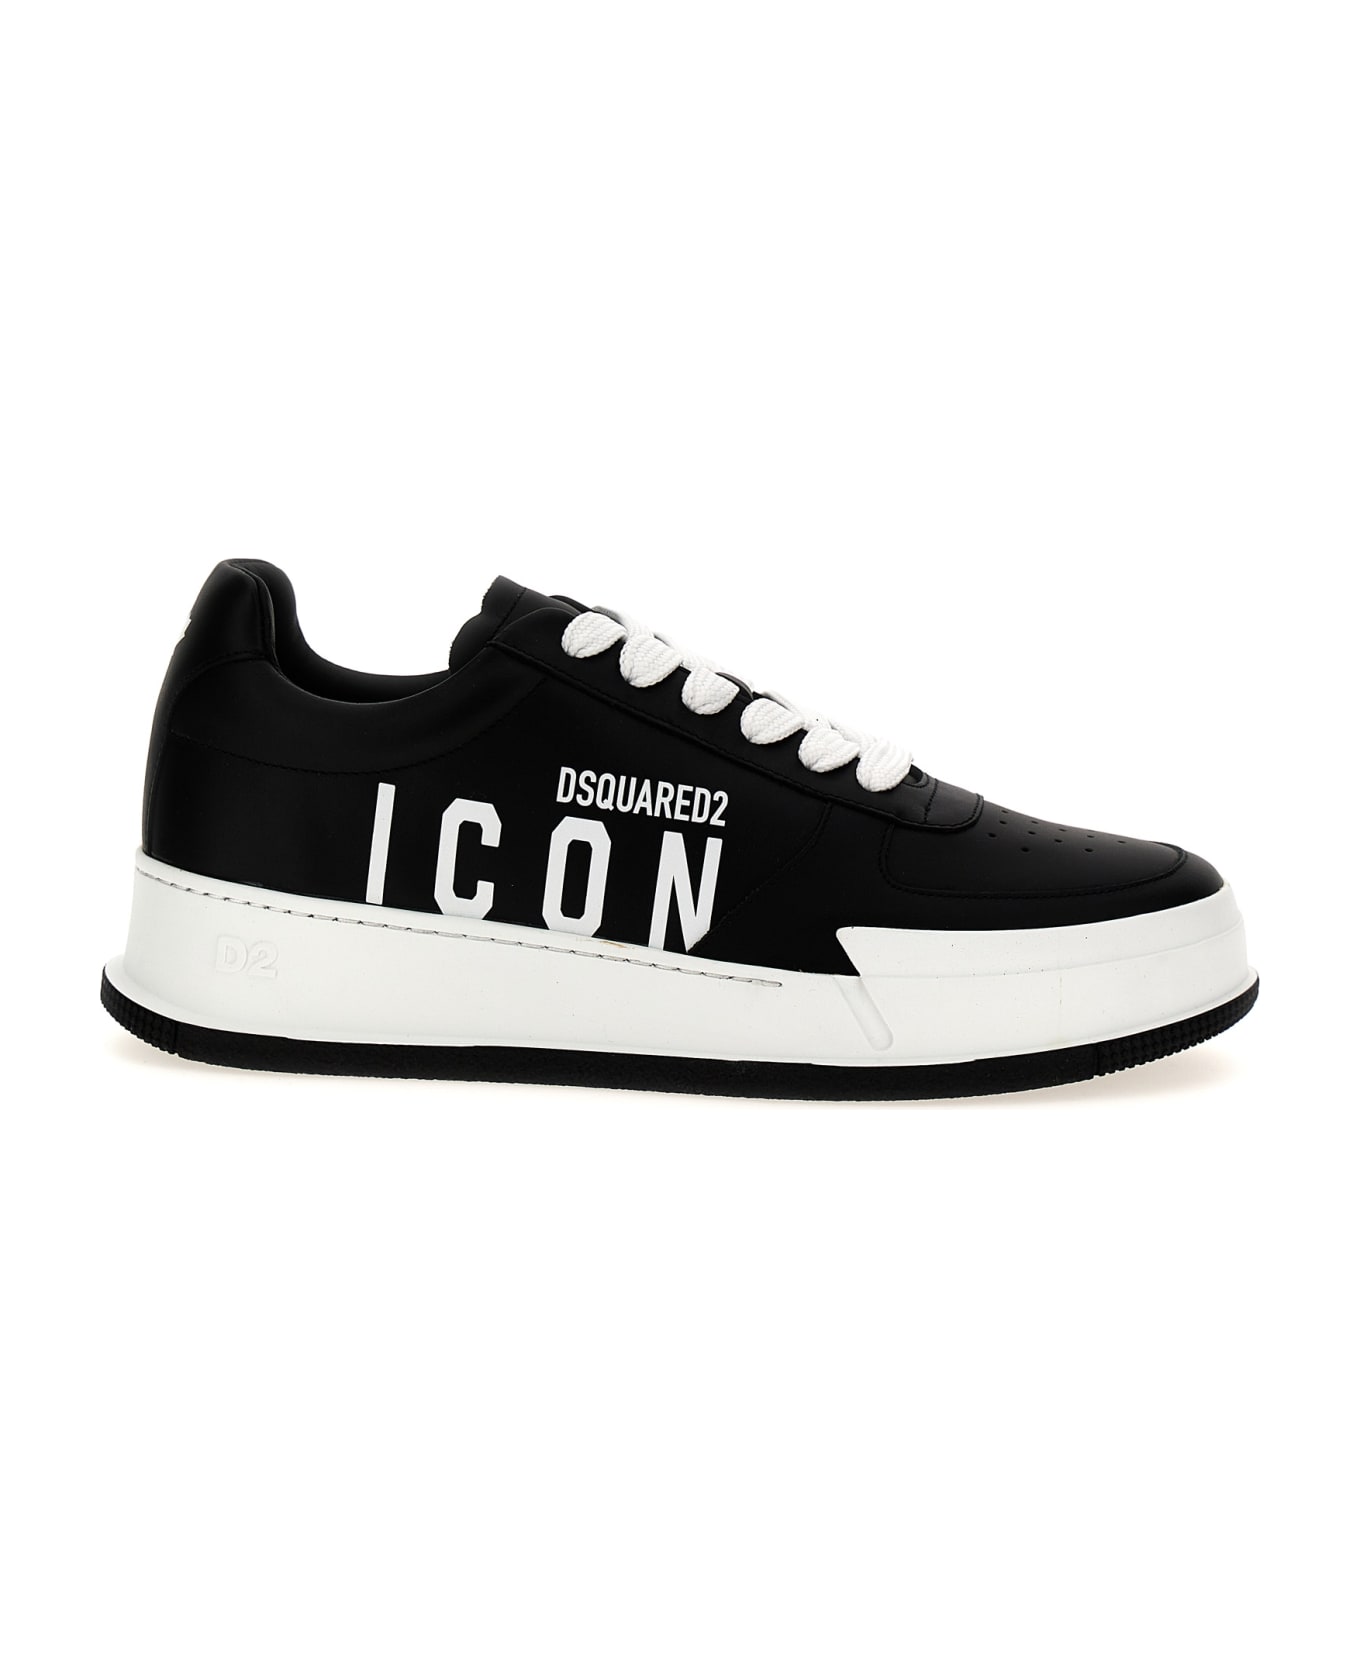 Dsquared2 'canadian' Sneakers - White/Black